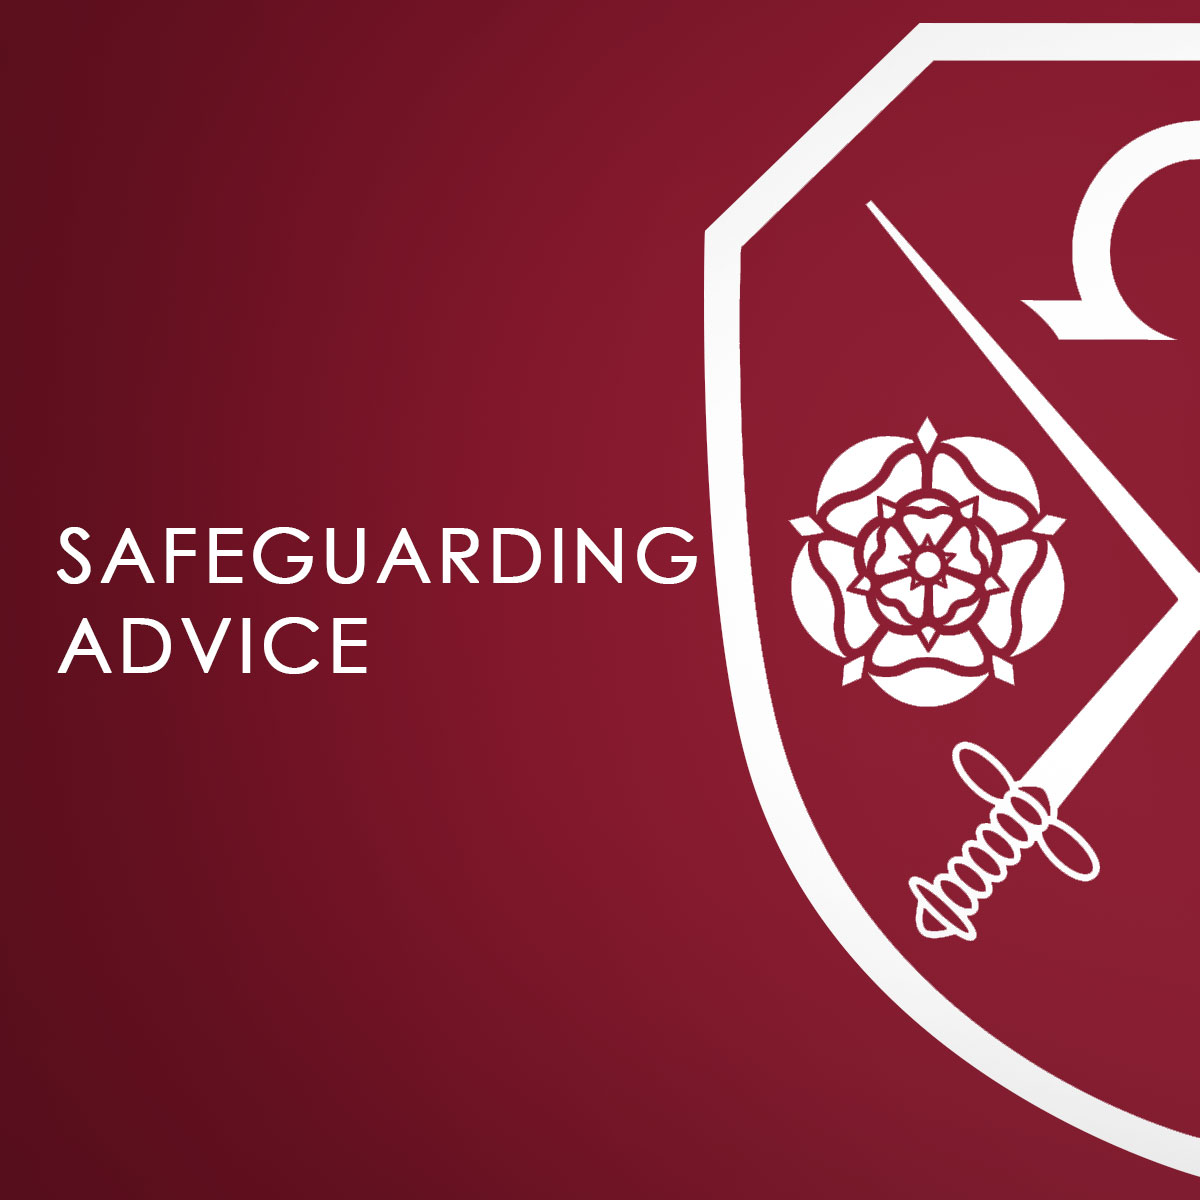 A maroon background with the East Barnet School logo which says Safeguarding